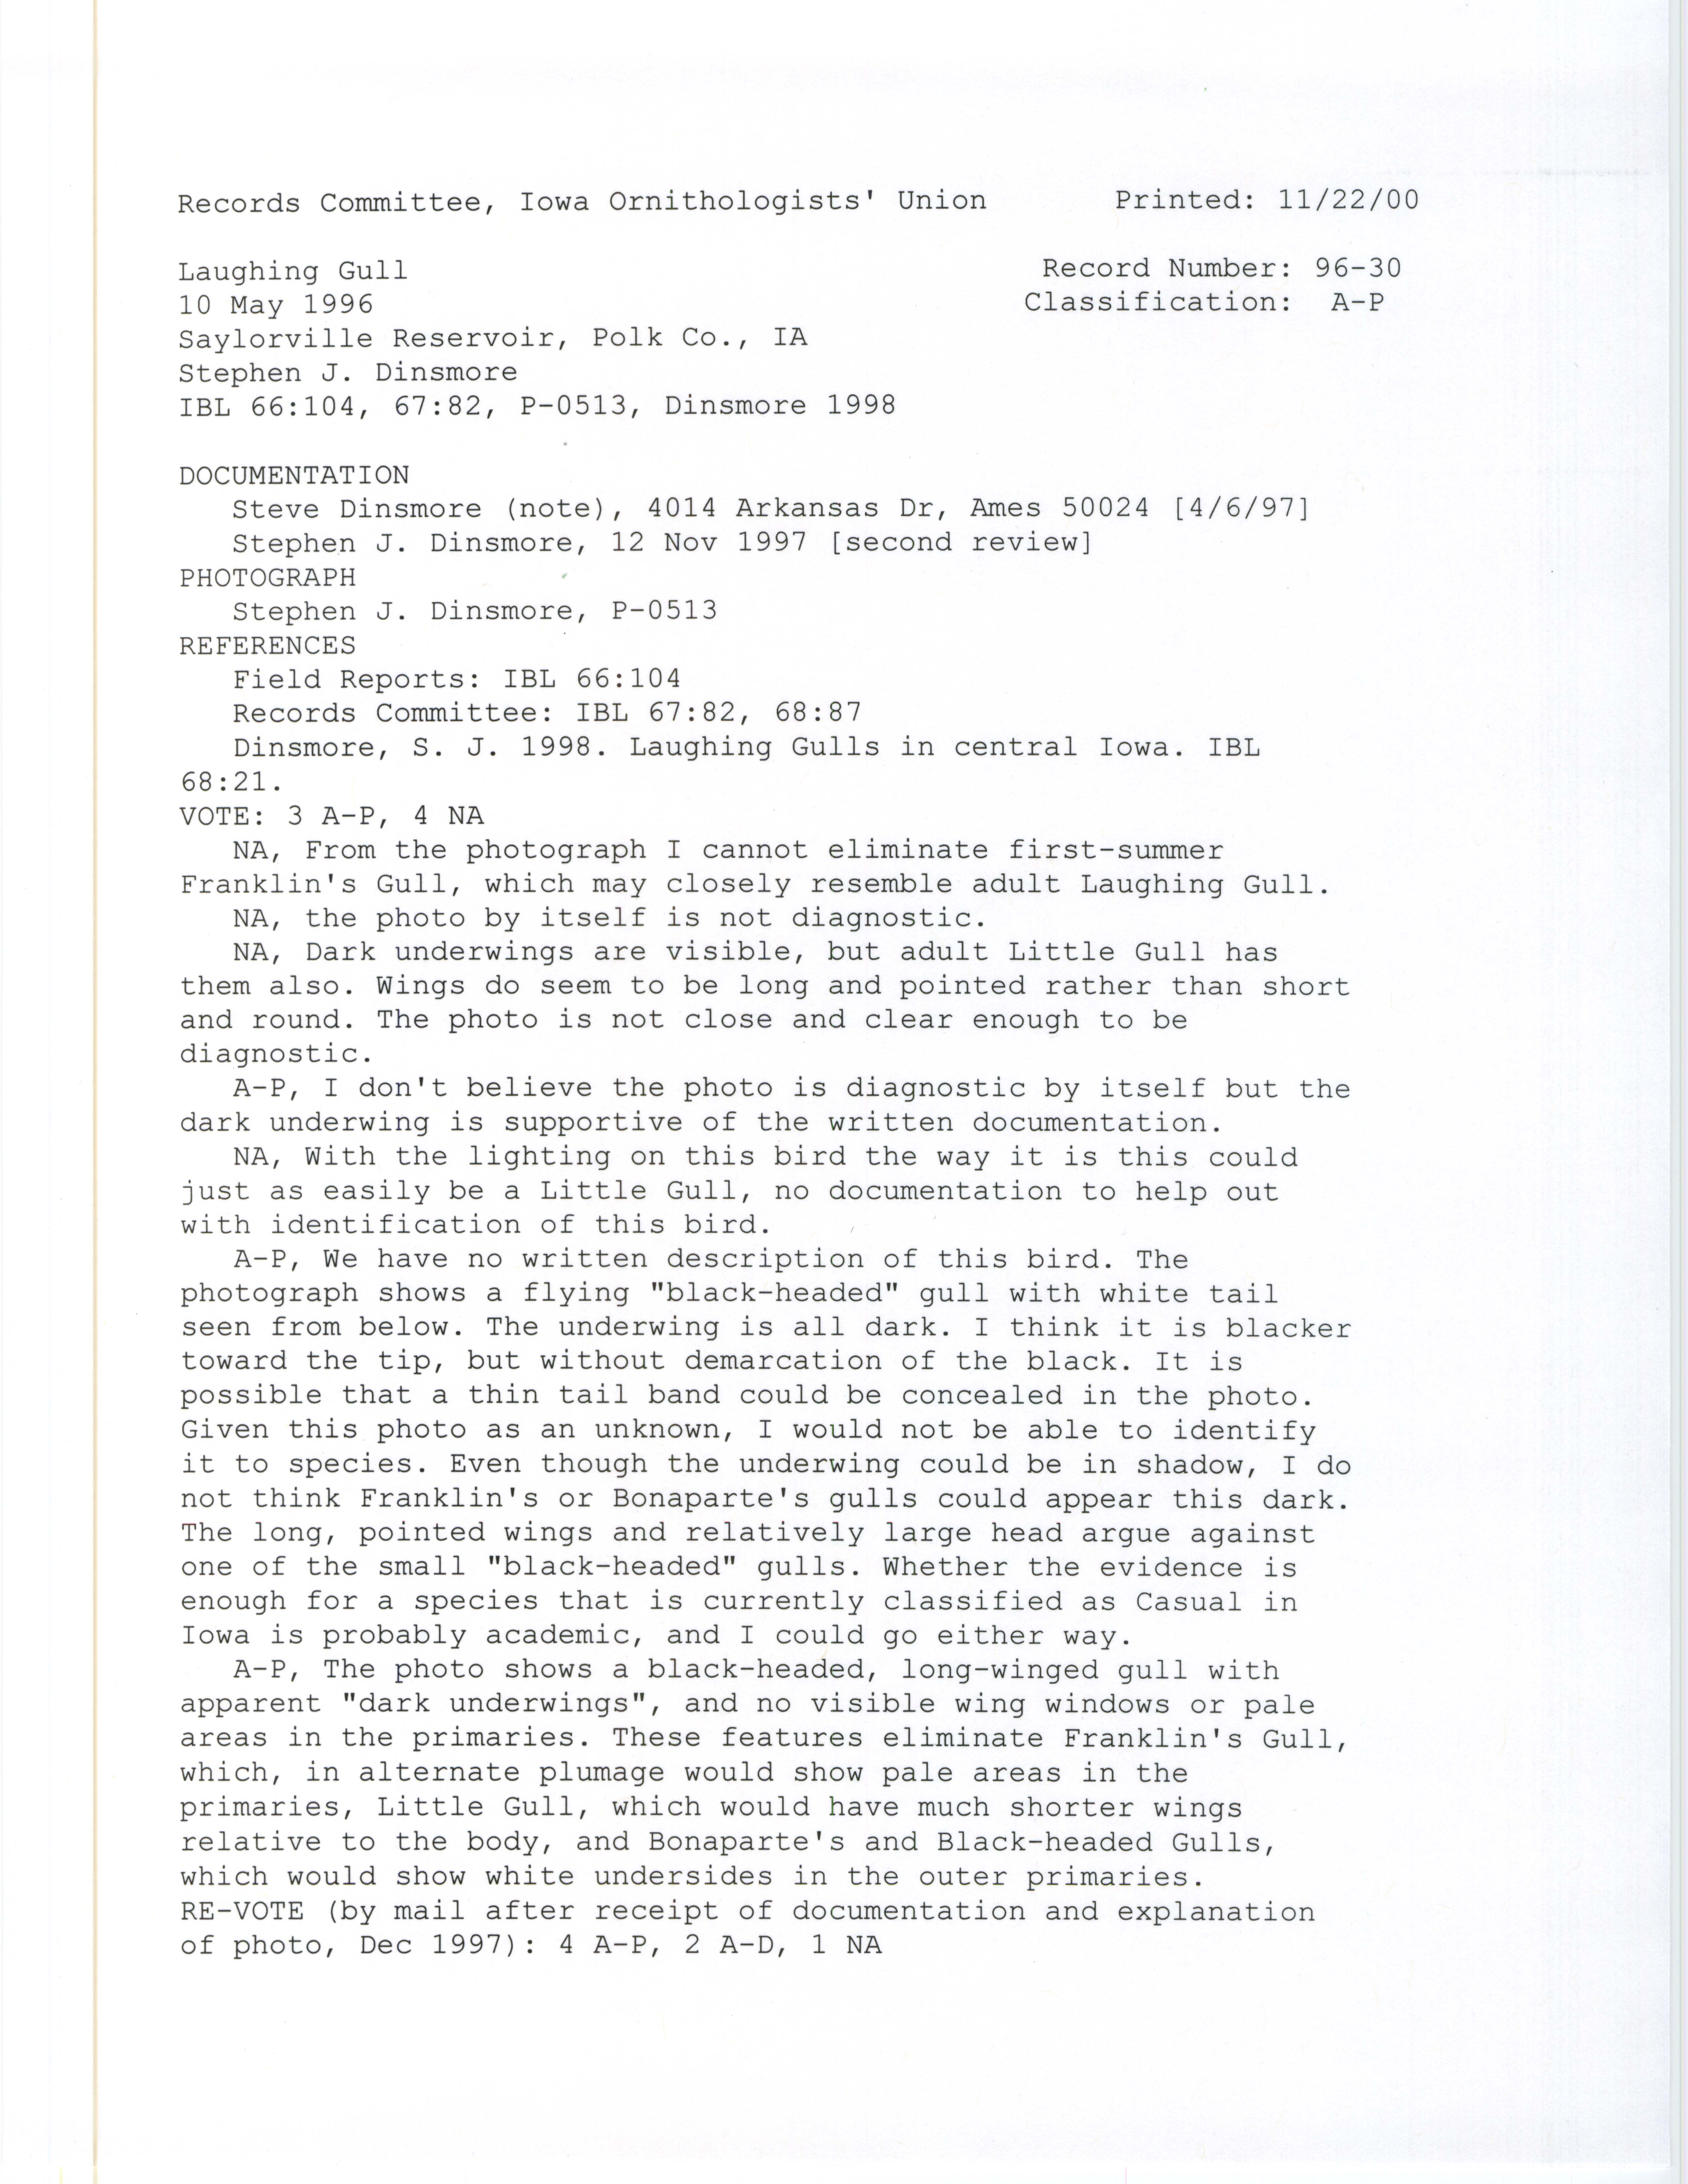 Records Committee review for rare bird sighting of Laughing Gull at Sandpiper Beach at Saylorville Reservoir, 1996